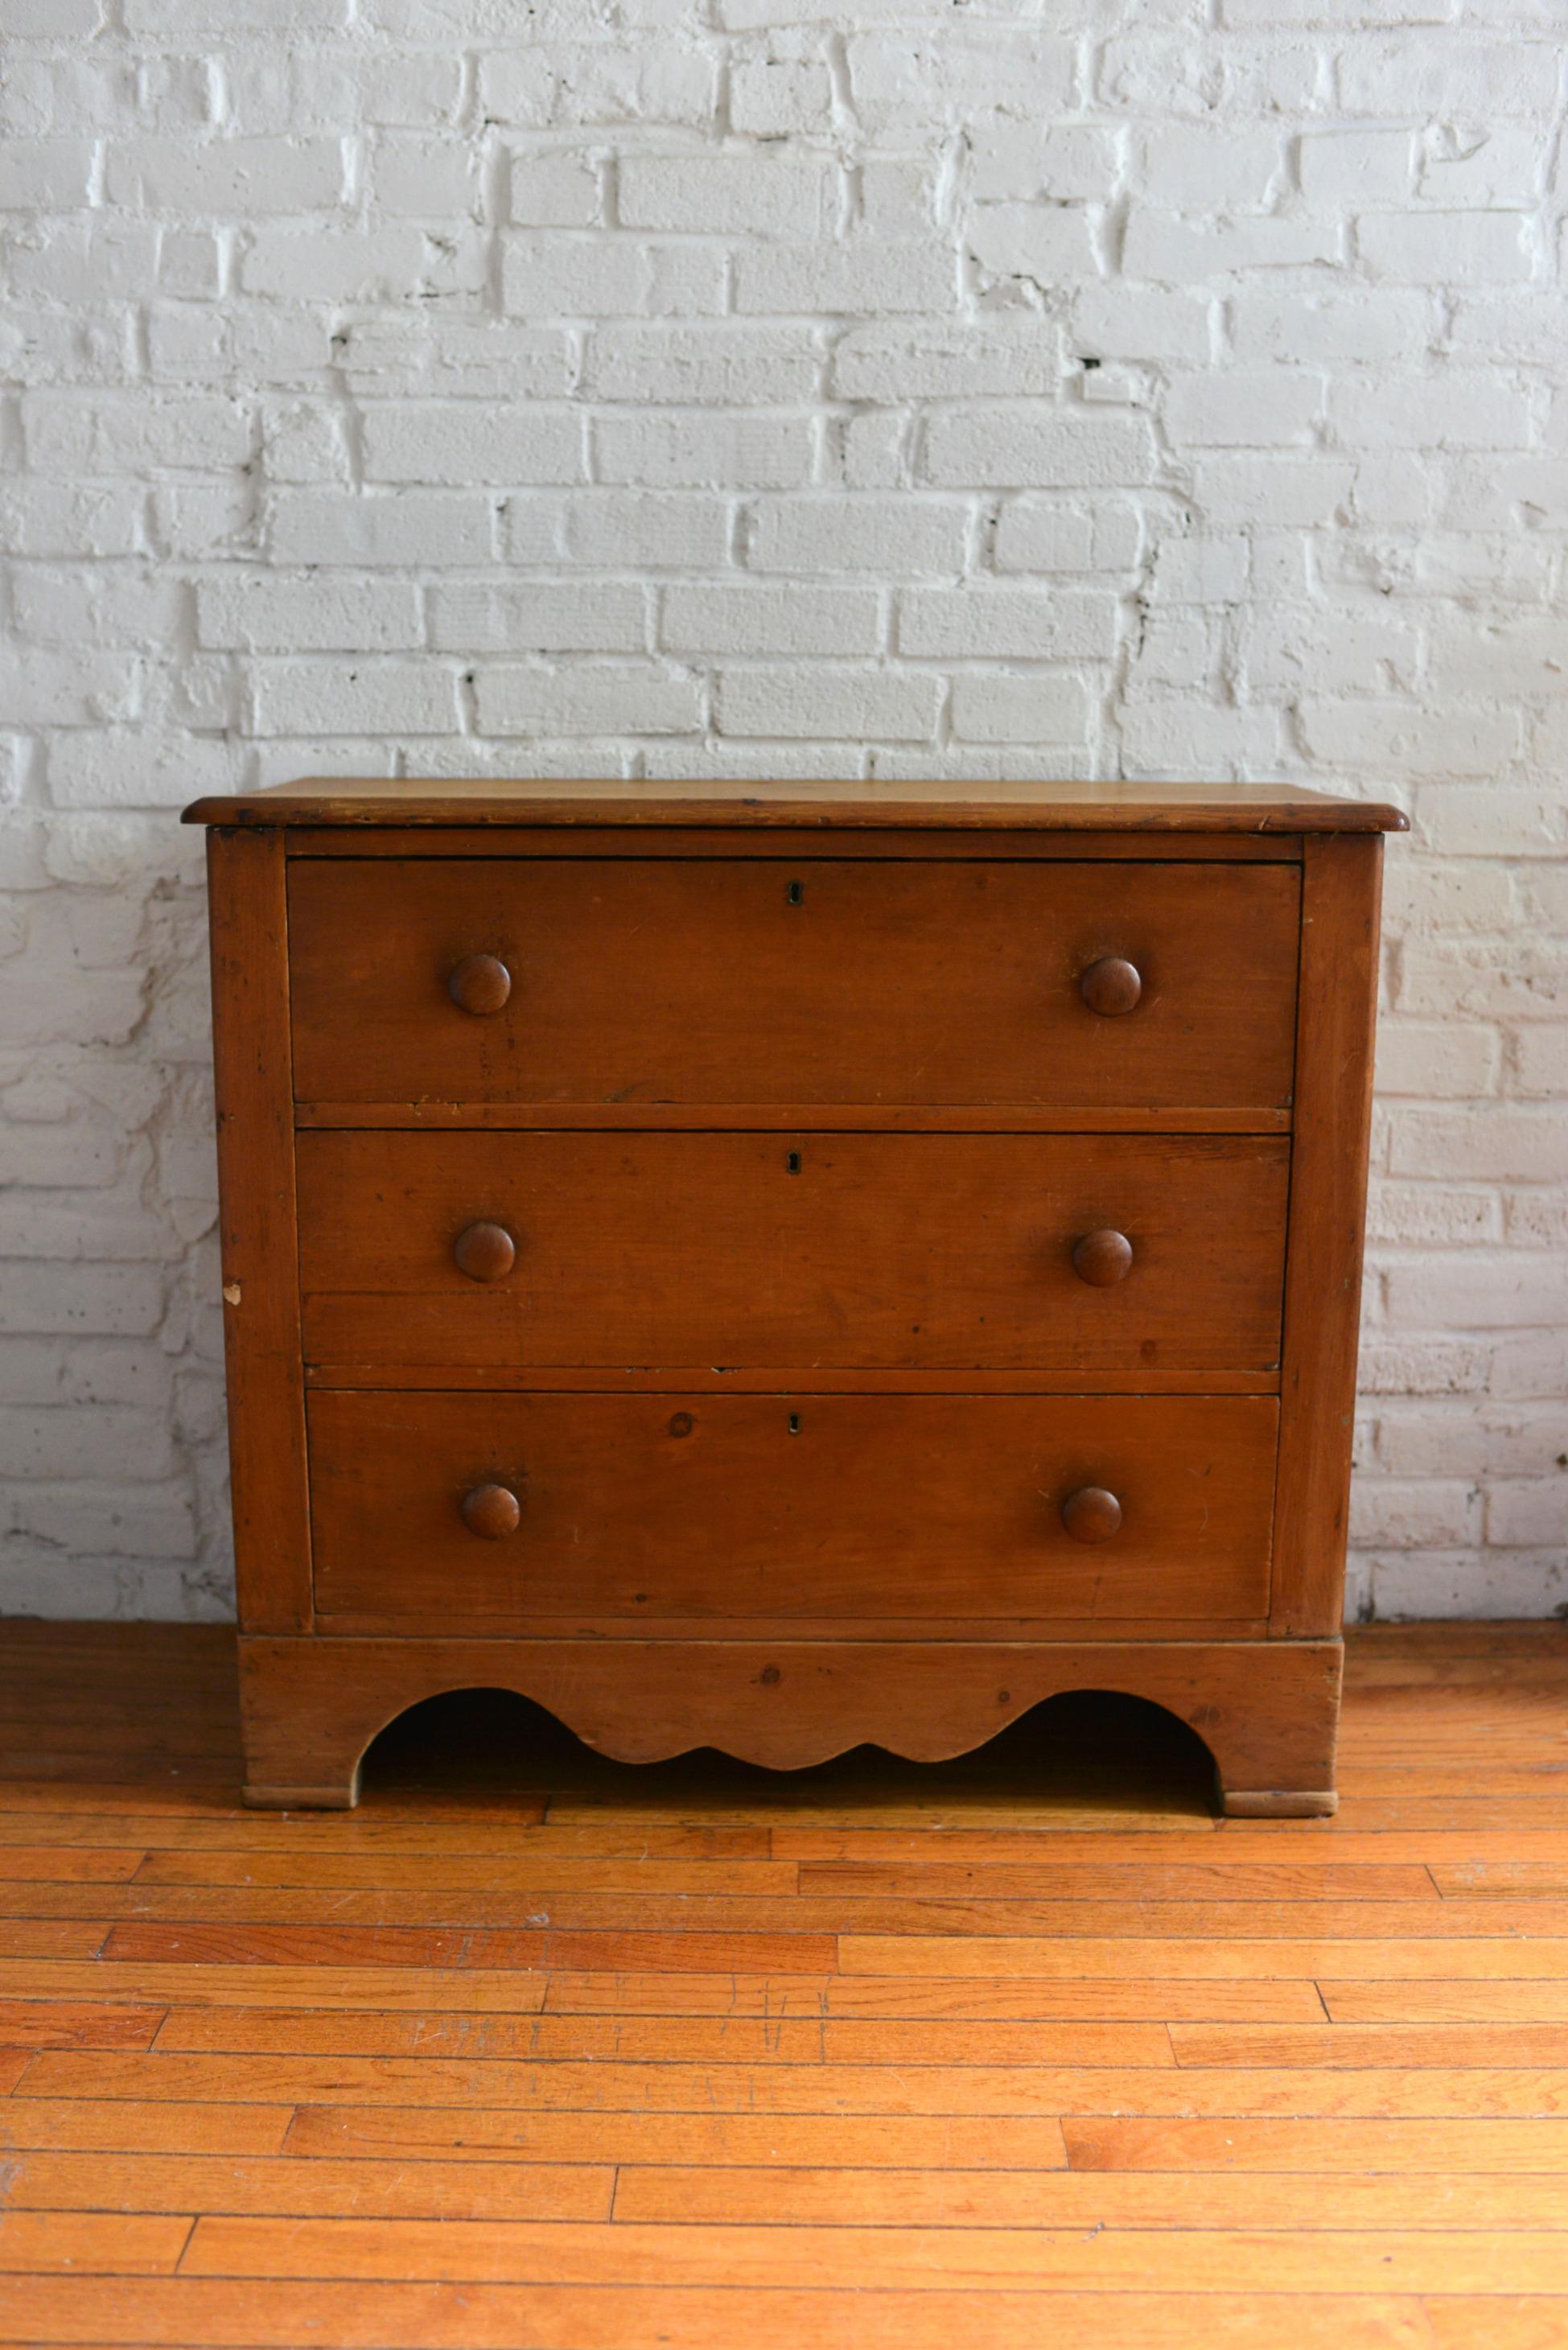 Beautiful 19th century pine chest of drawers. This handsome solid-wood dresser features three sizable drawers, beautiful patina-ed pine and knapp joints, also known as pin and cove or half moon joints. The piece has keyhole drawers and solid